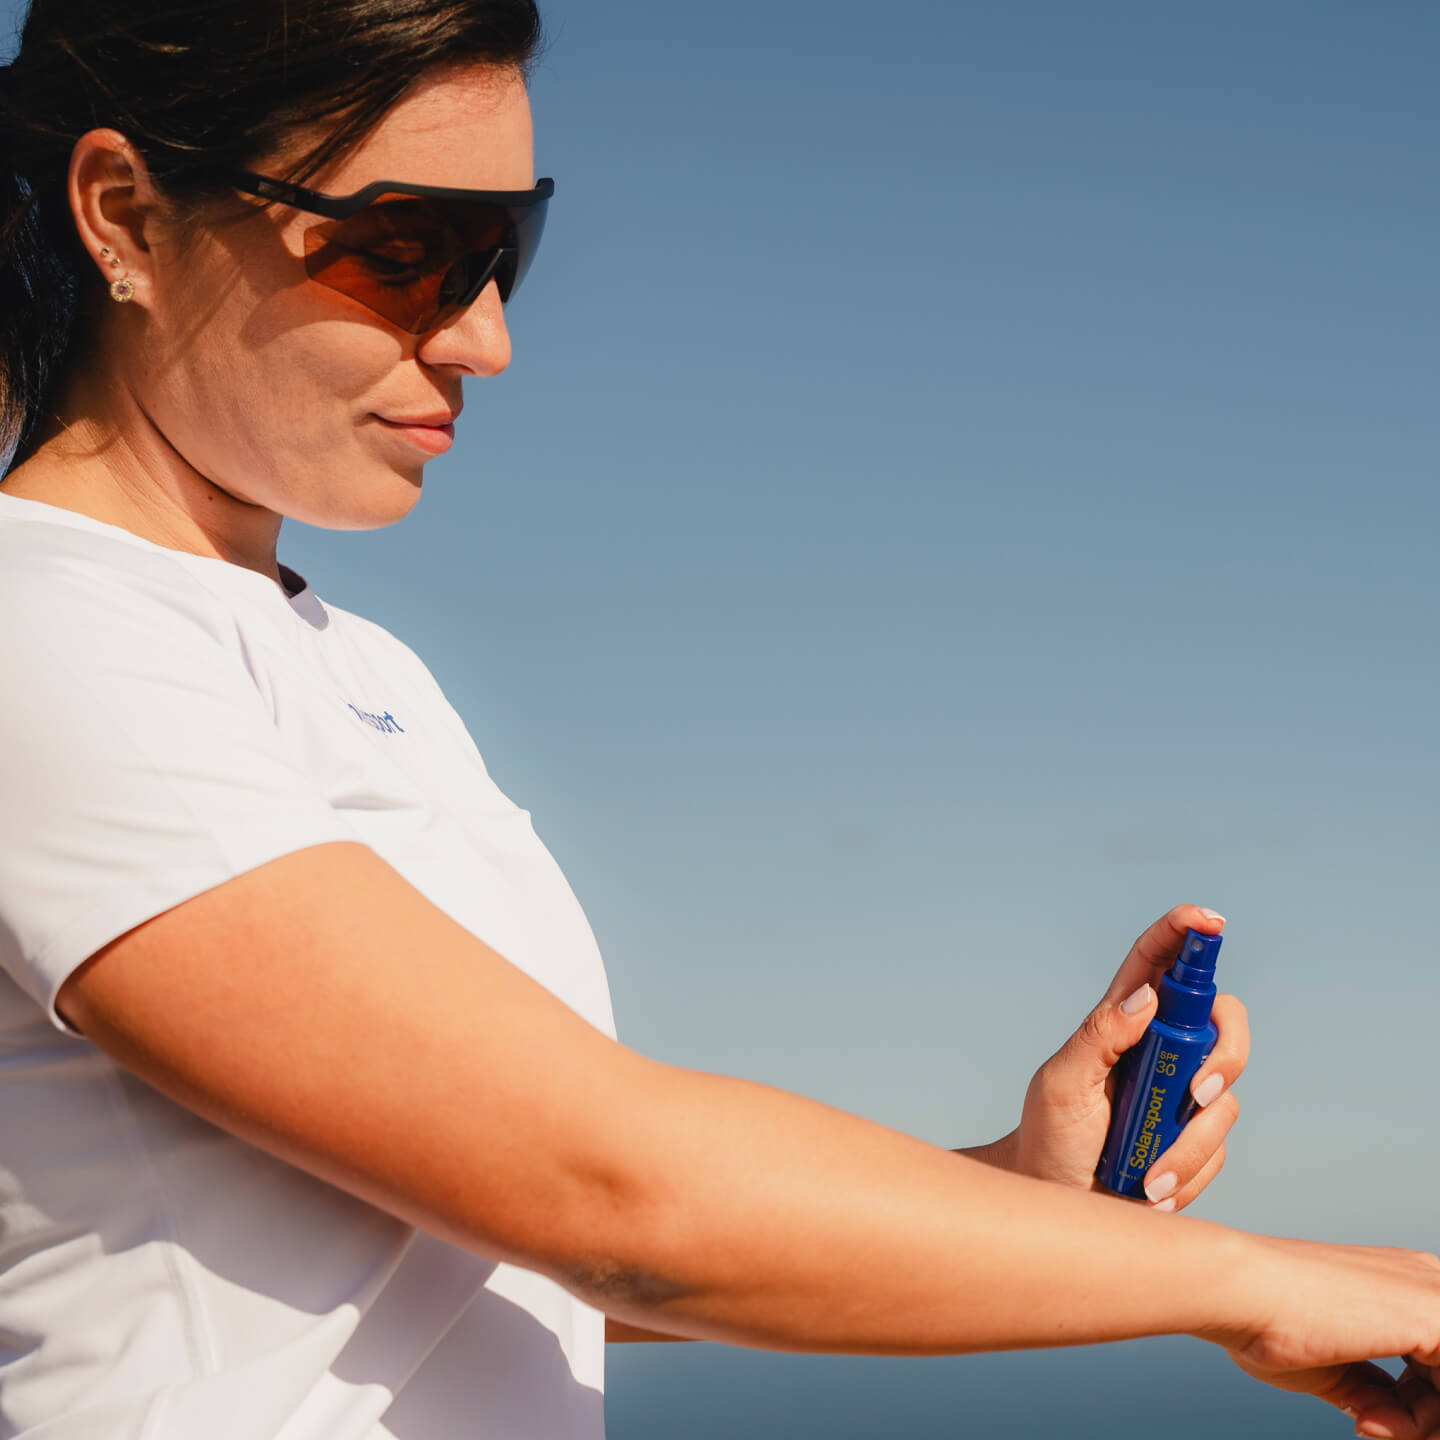 Sunscreen developed to protect during sporting activity at the highest level.